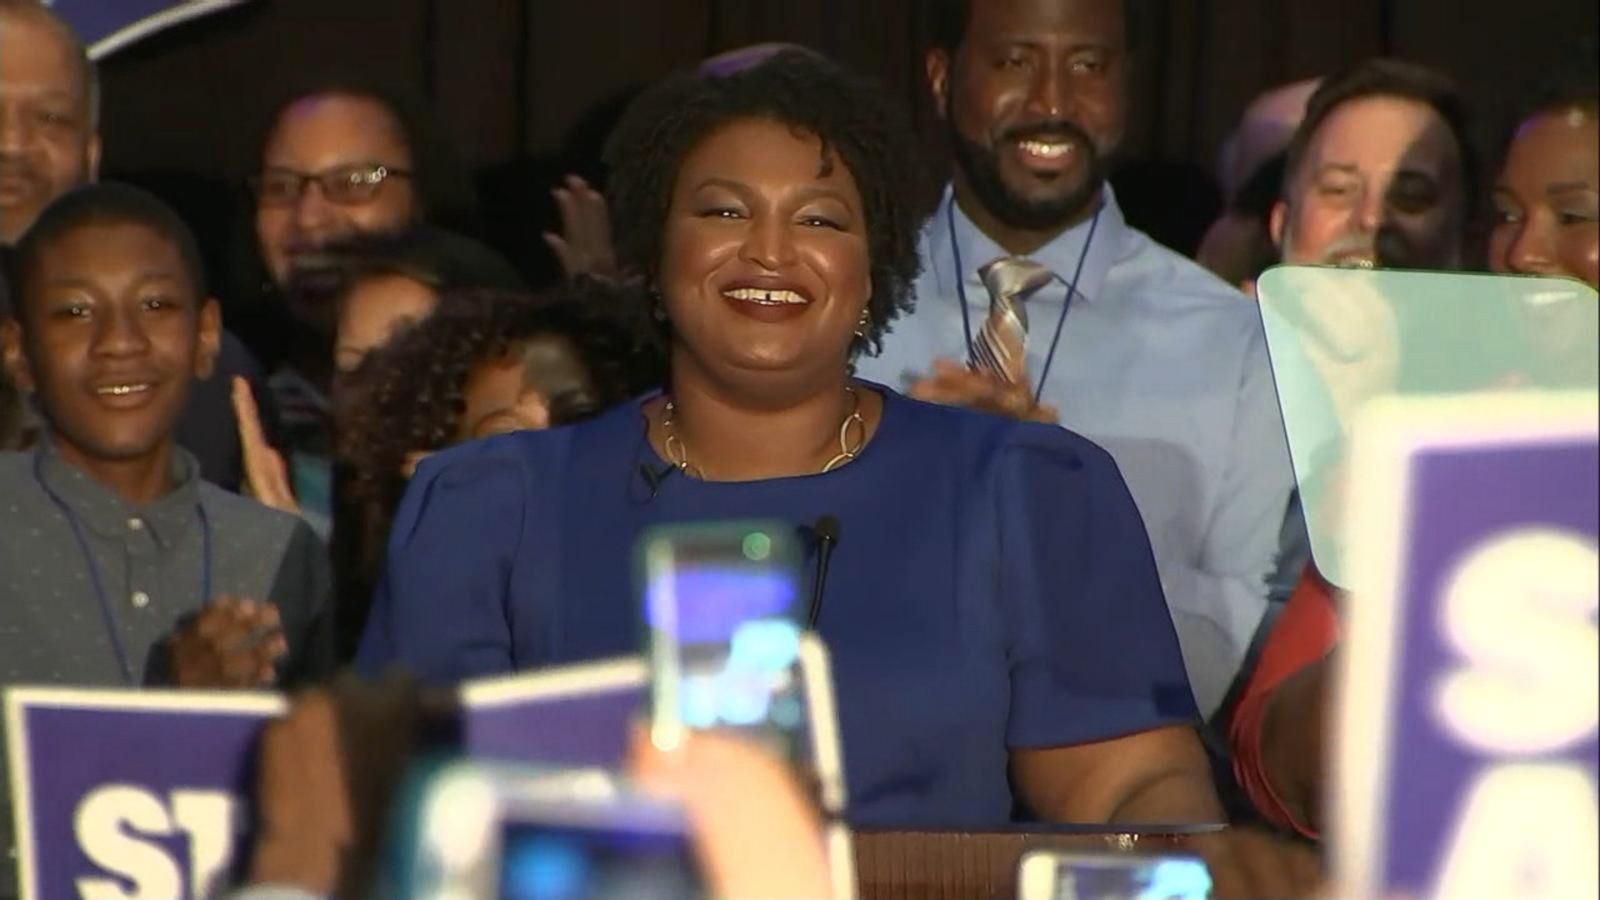 VIDEO: Black woman makes history with election win